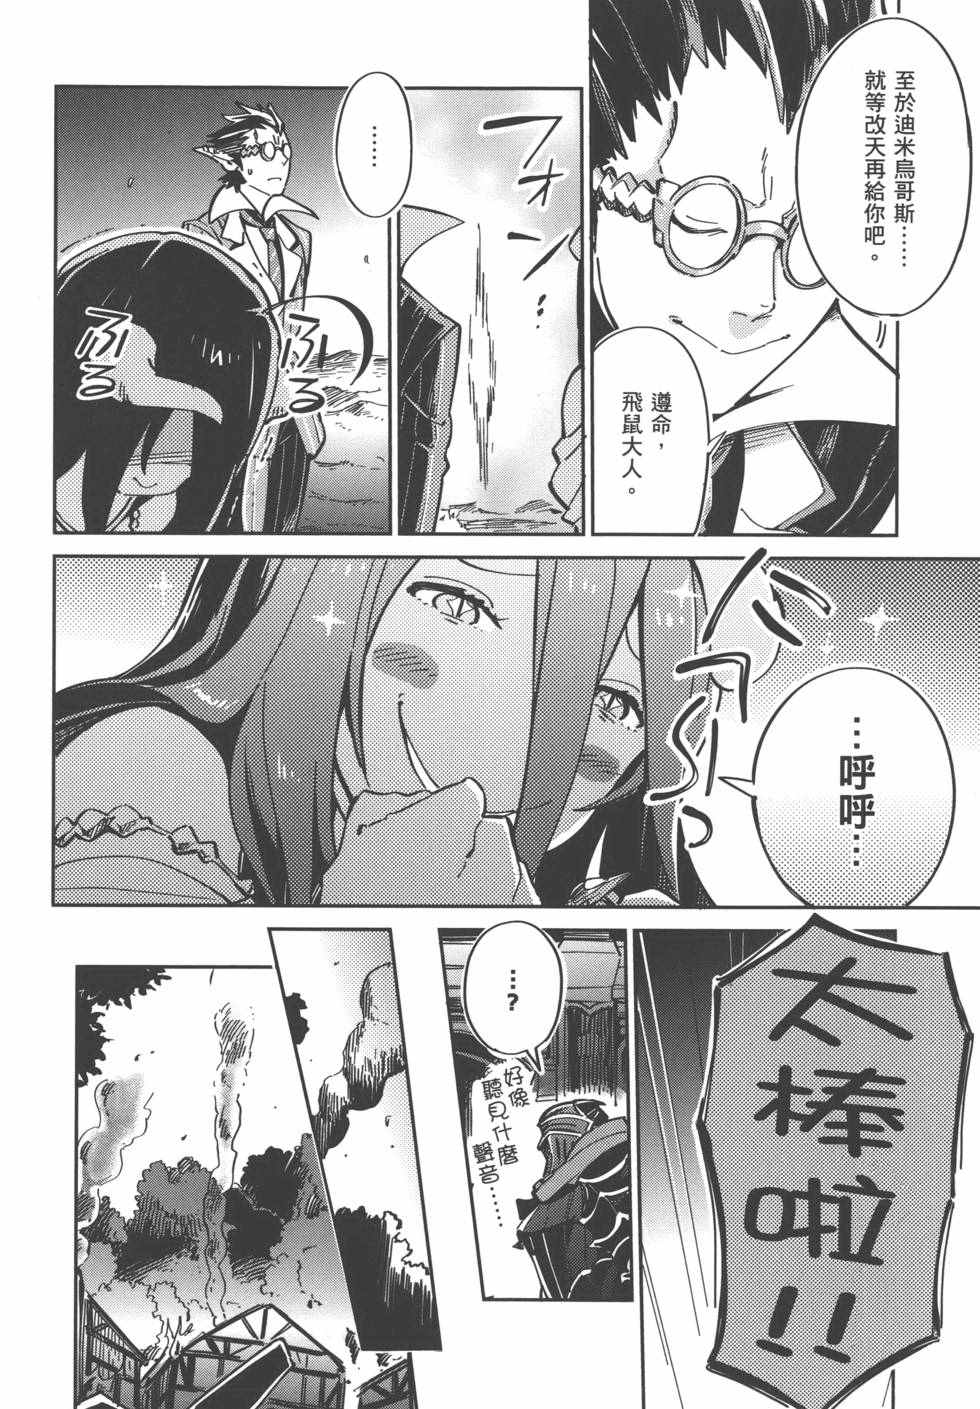 OVERLORD - 第1卷(2/4) - 4